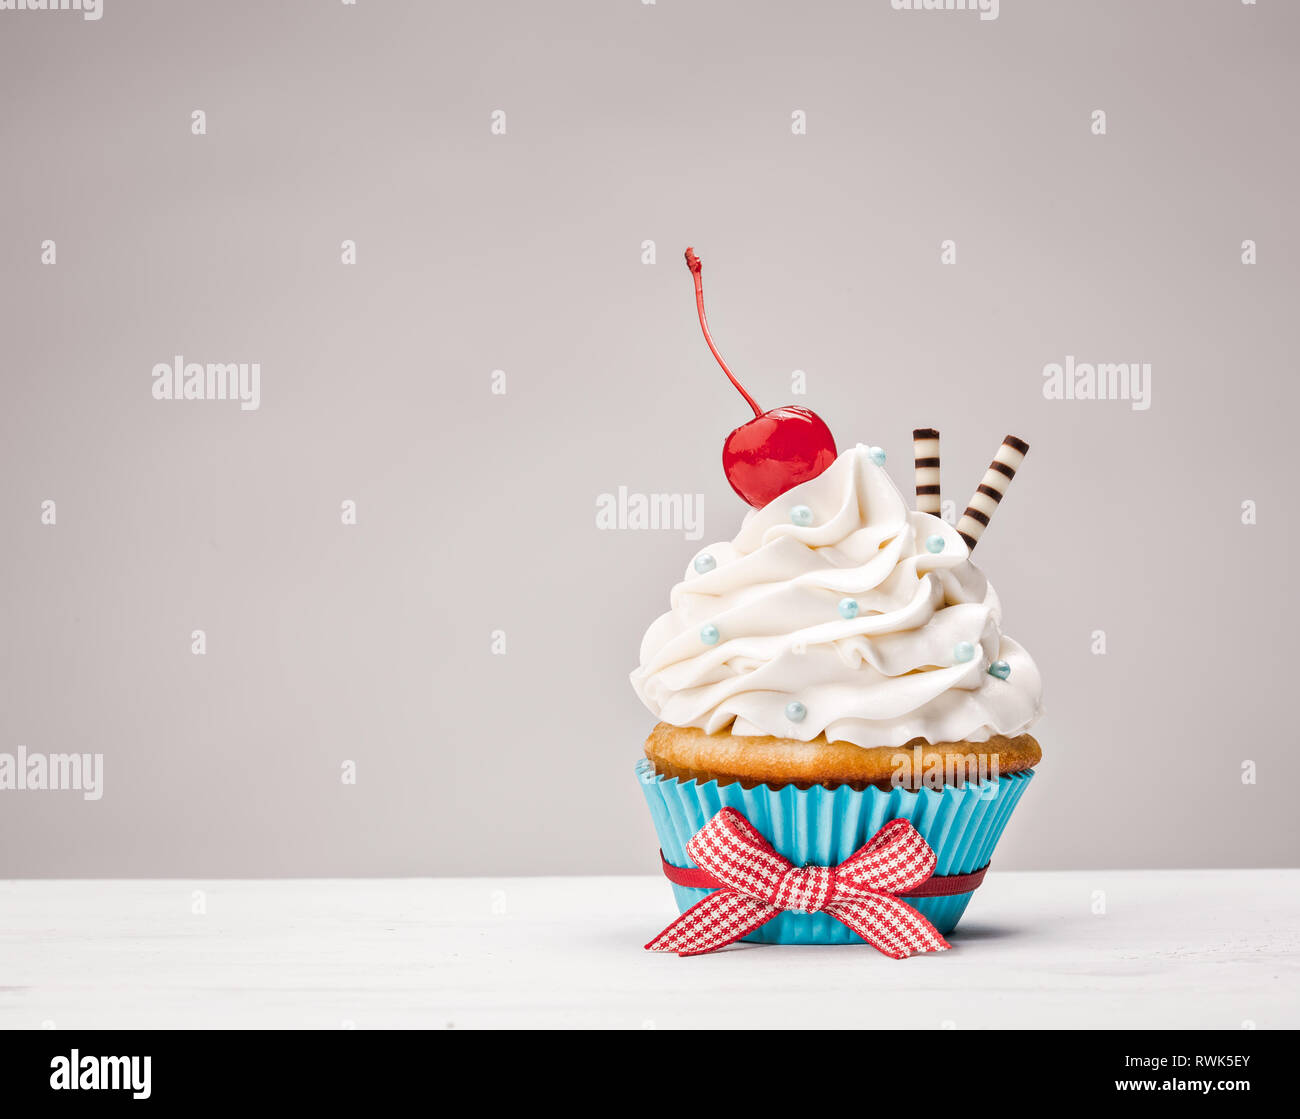 Vanilla buttercream cupcake with a cherry on top over a light grey background. Stock Photo